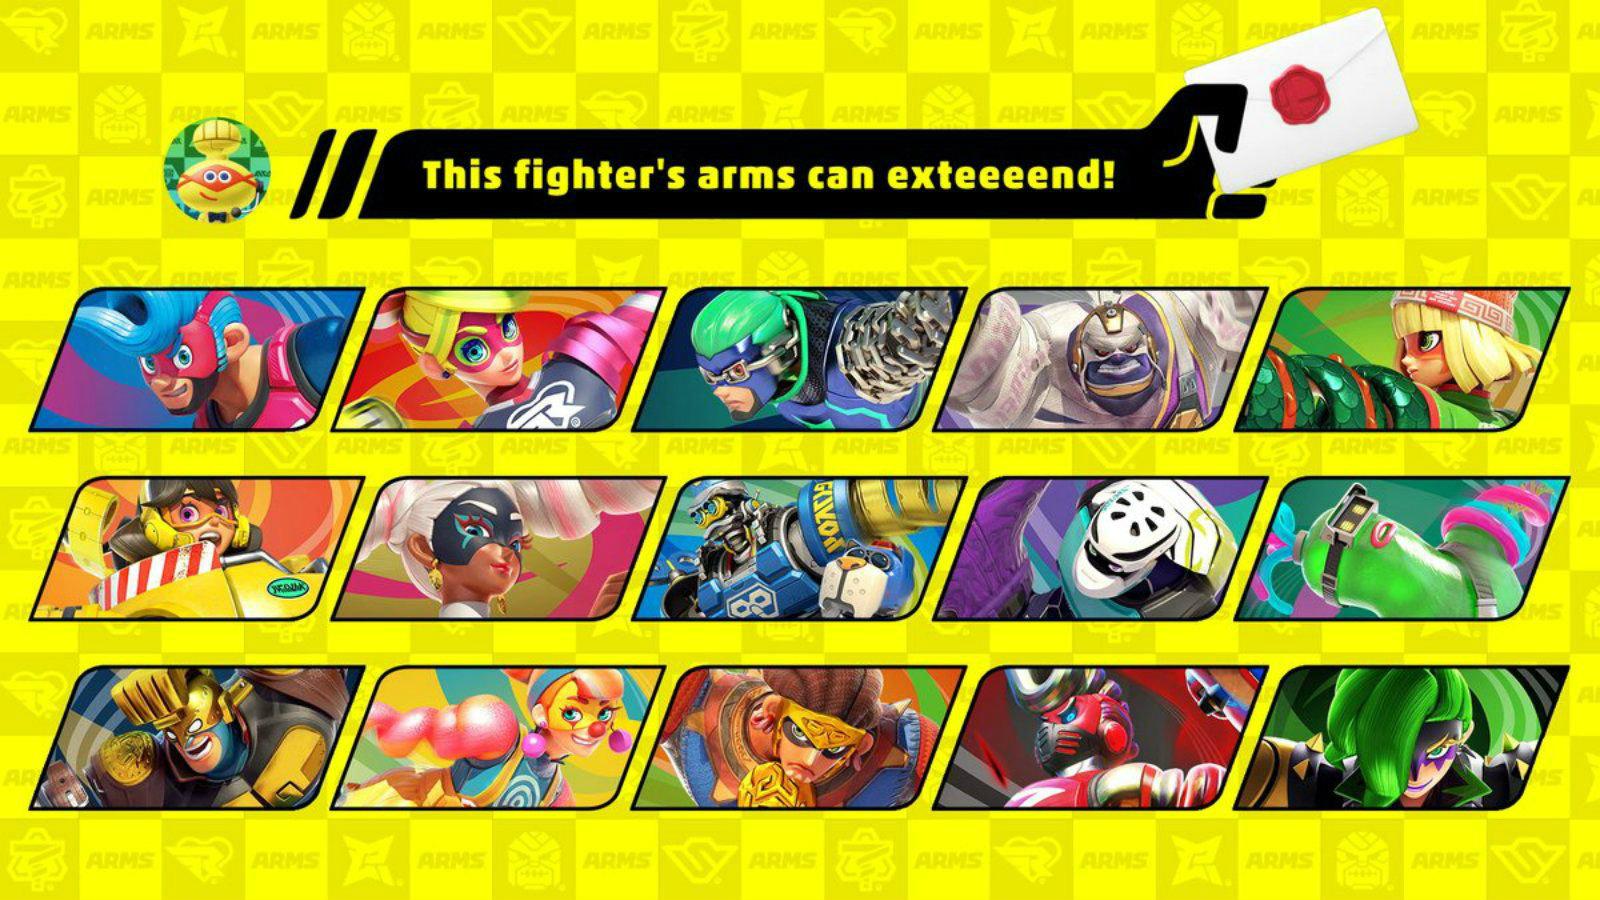 A new ARMS fighter coming to Smash with the whole roster